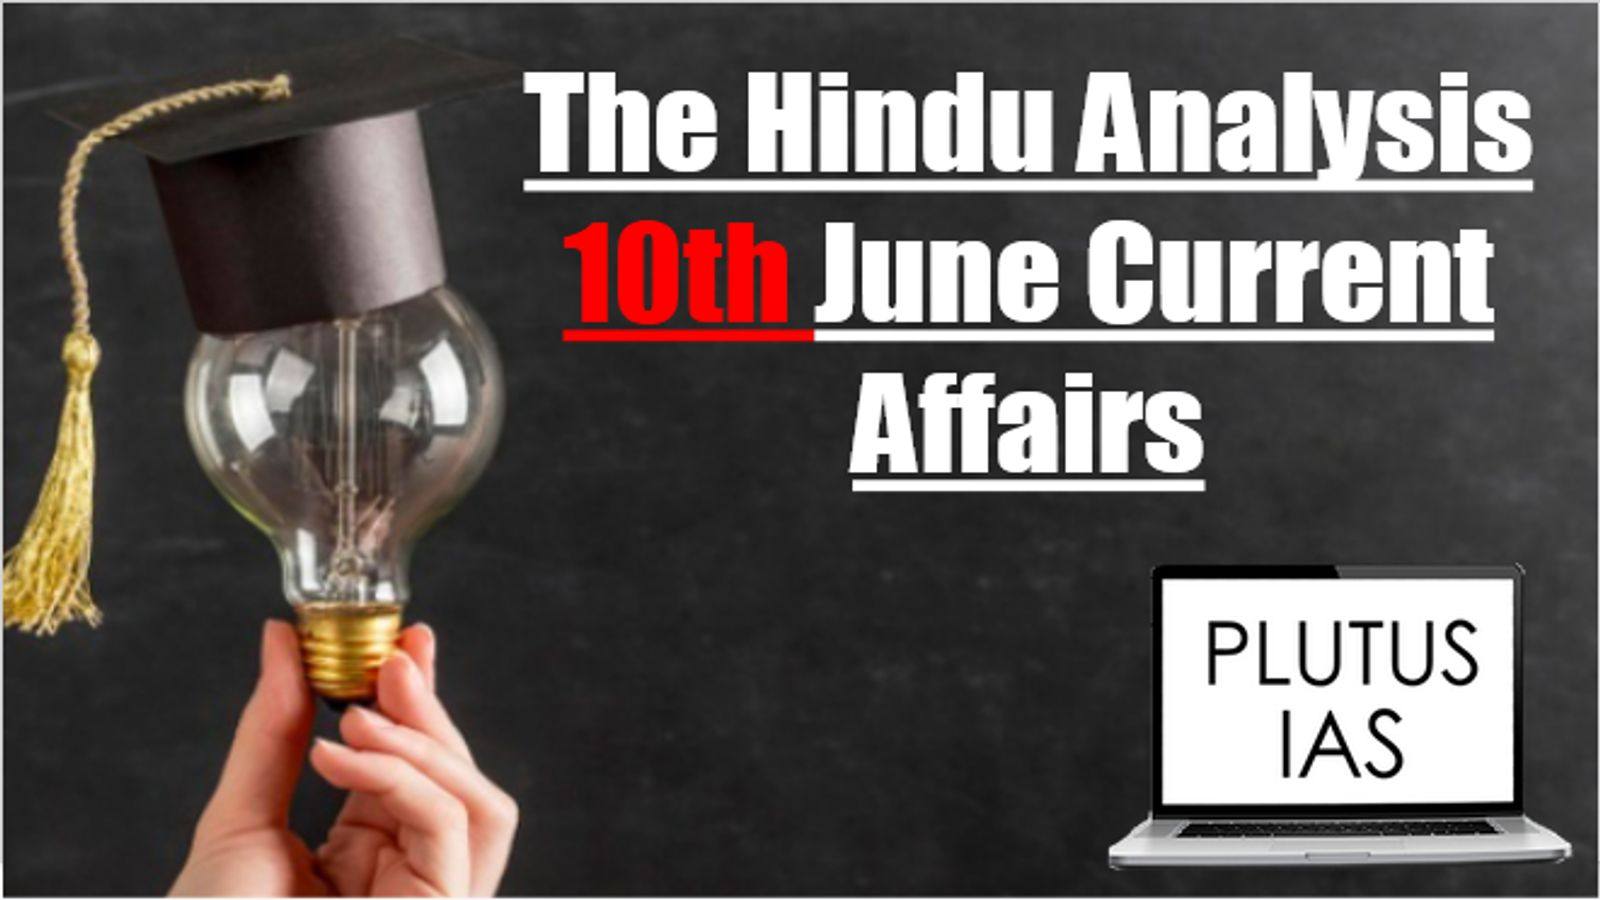 Today Current Affairs 10th June